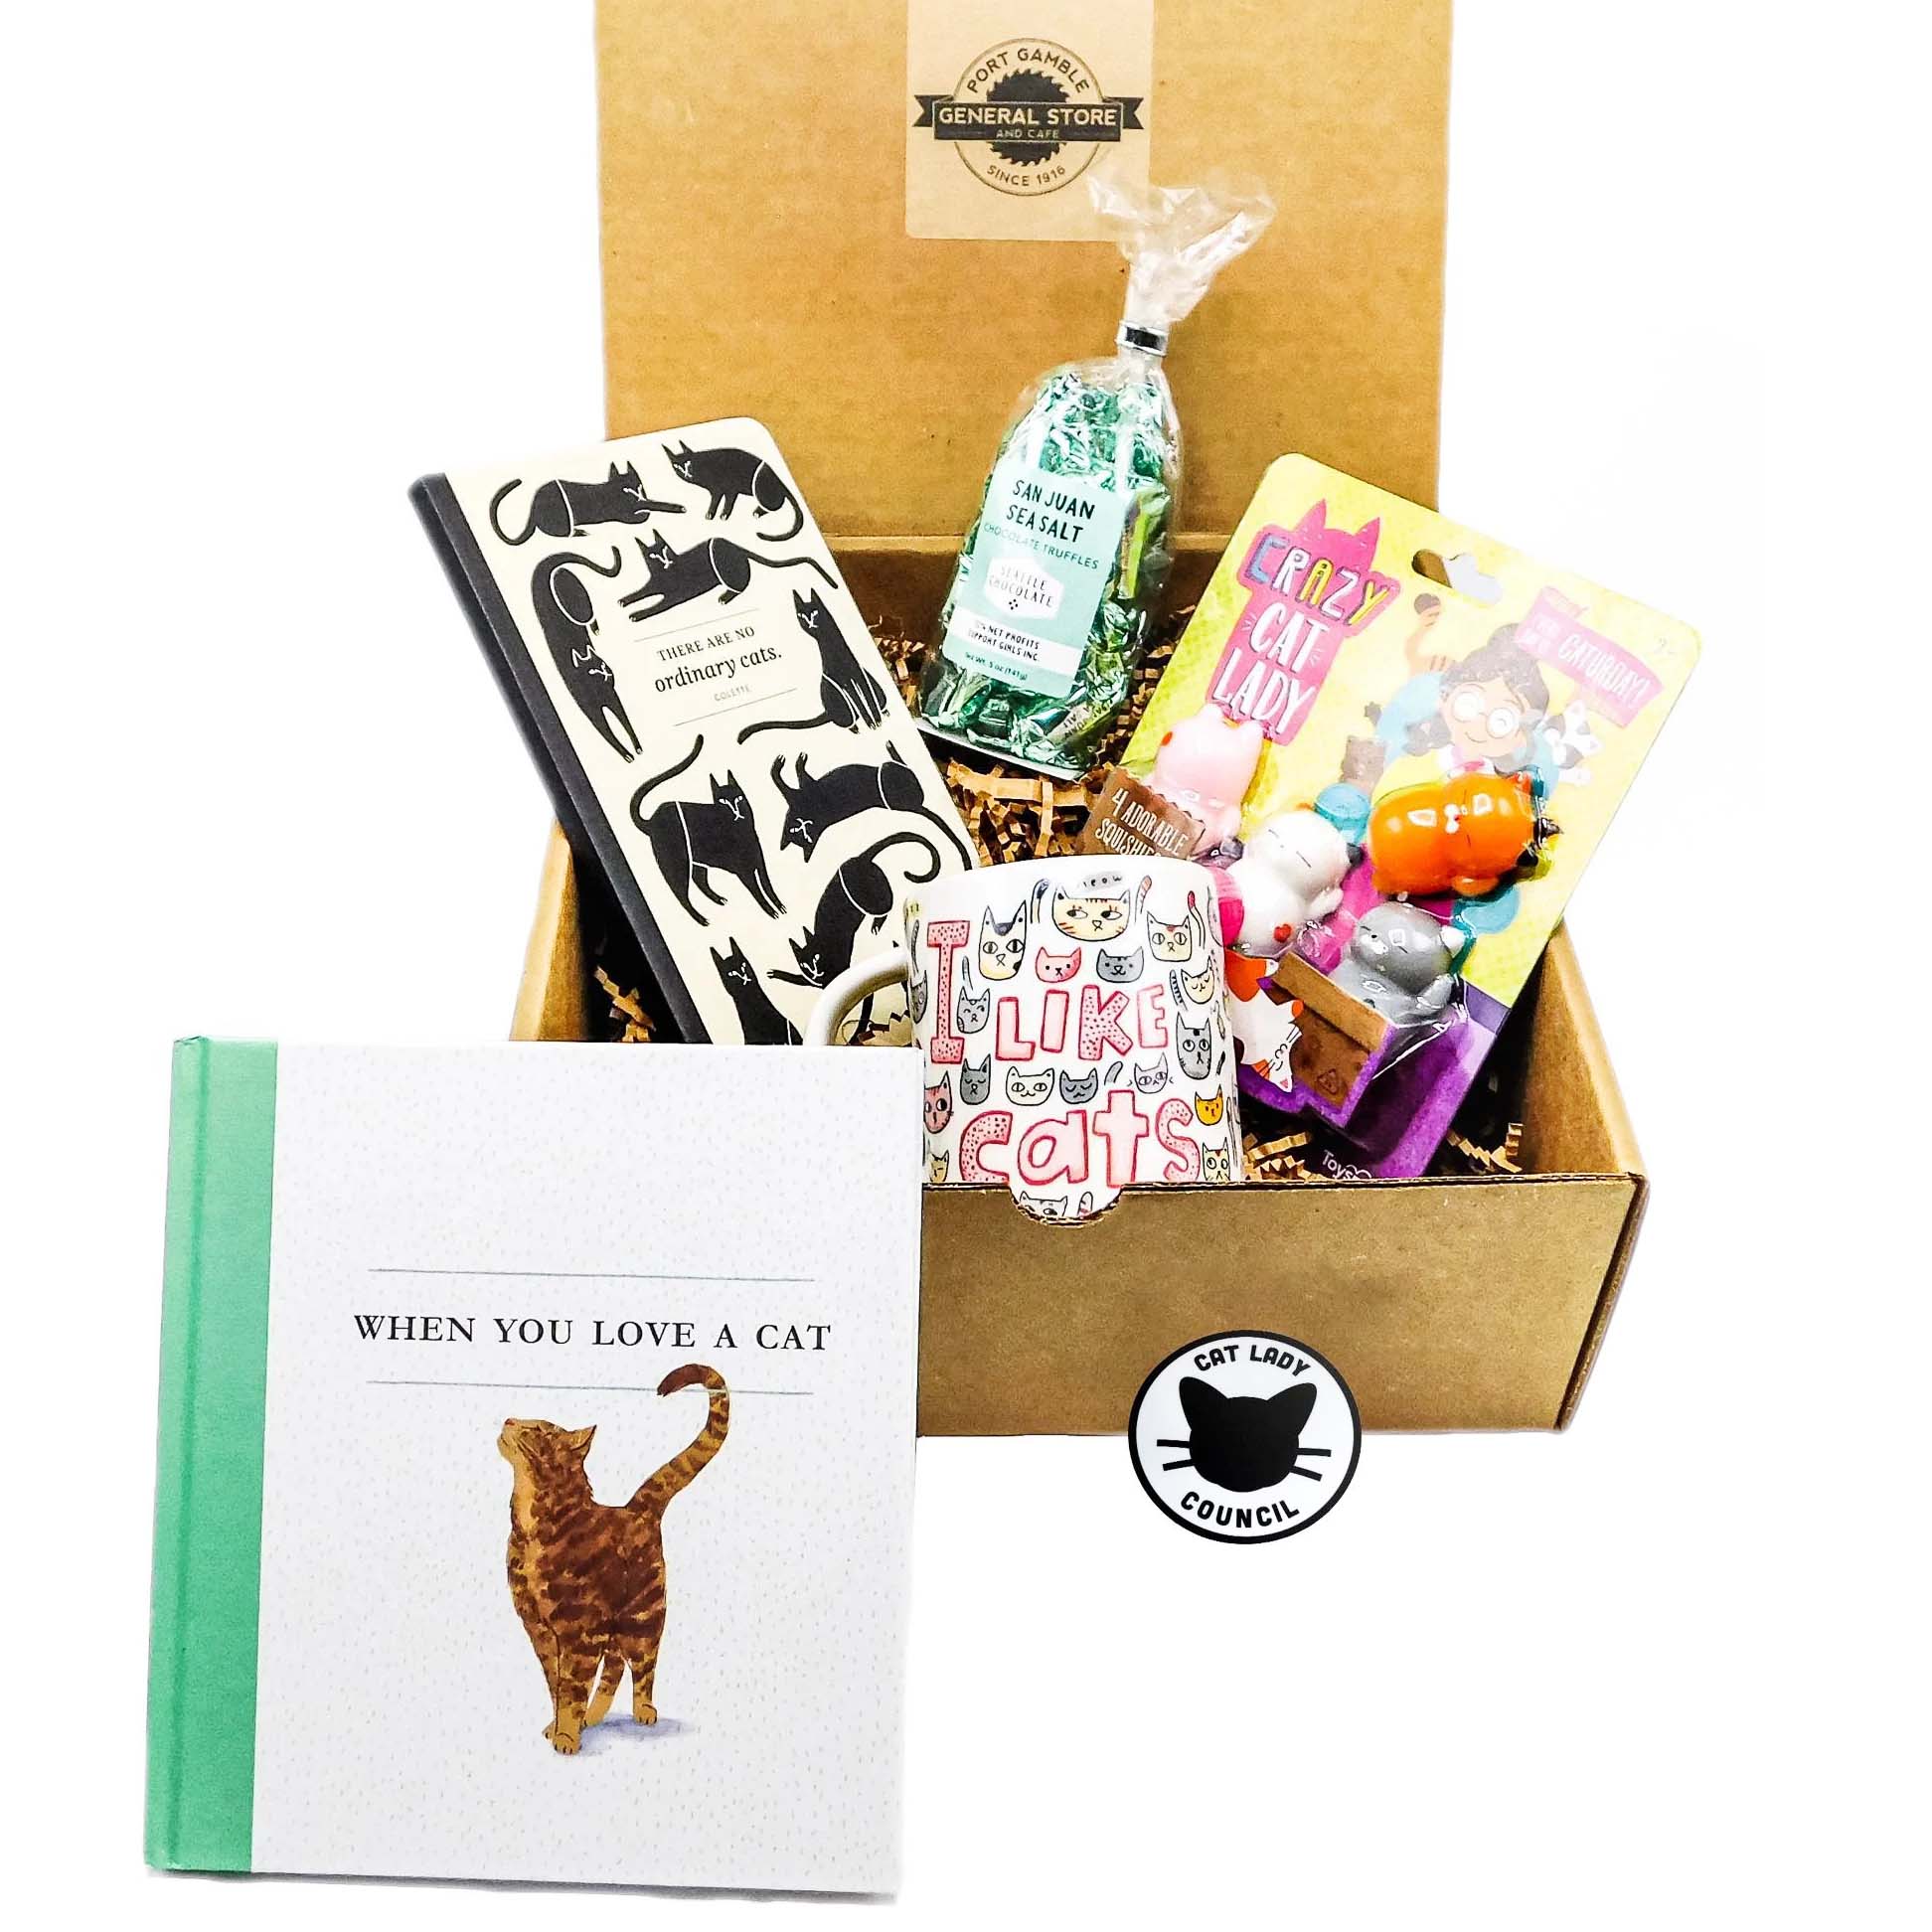 This gift box is filled with cat-themed goodies, including a bag of premium chocolate truffles, a mug, a journal and the book "When You Love a Cat” and cat squishies.